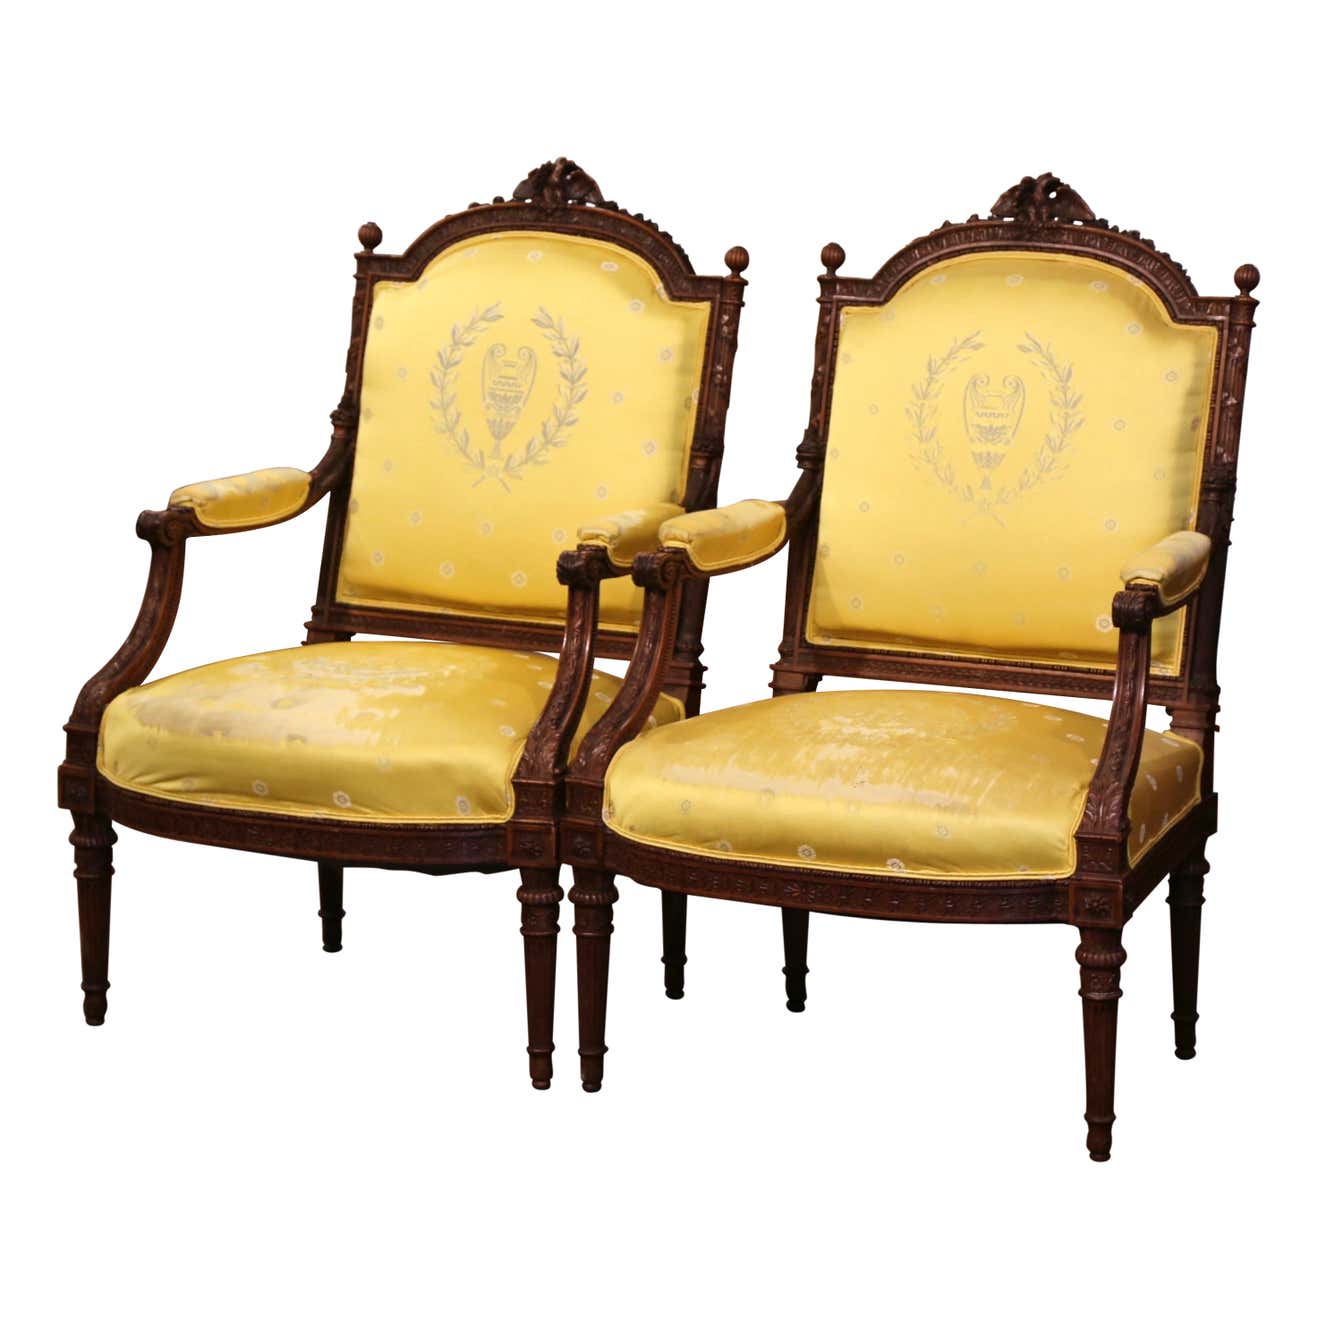 Pair of 19th Century French Louis XVI Carved Walnut Carved Fauteuils  Armchairs - Country French Interiors